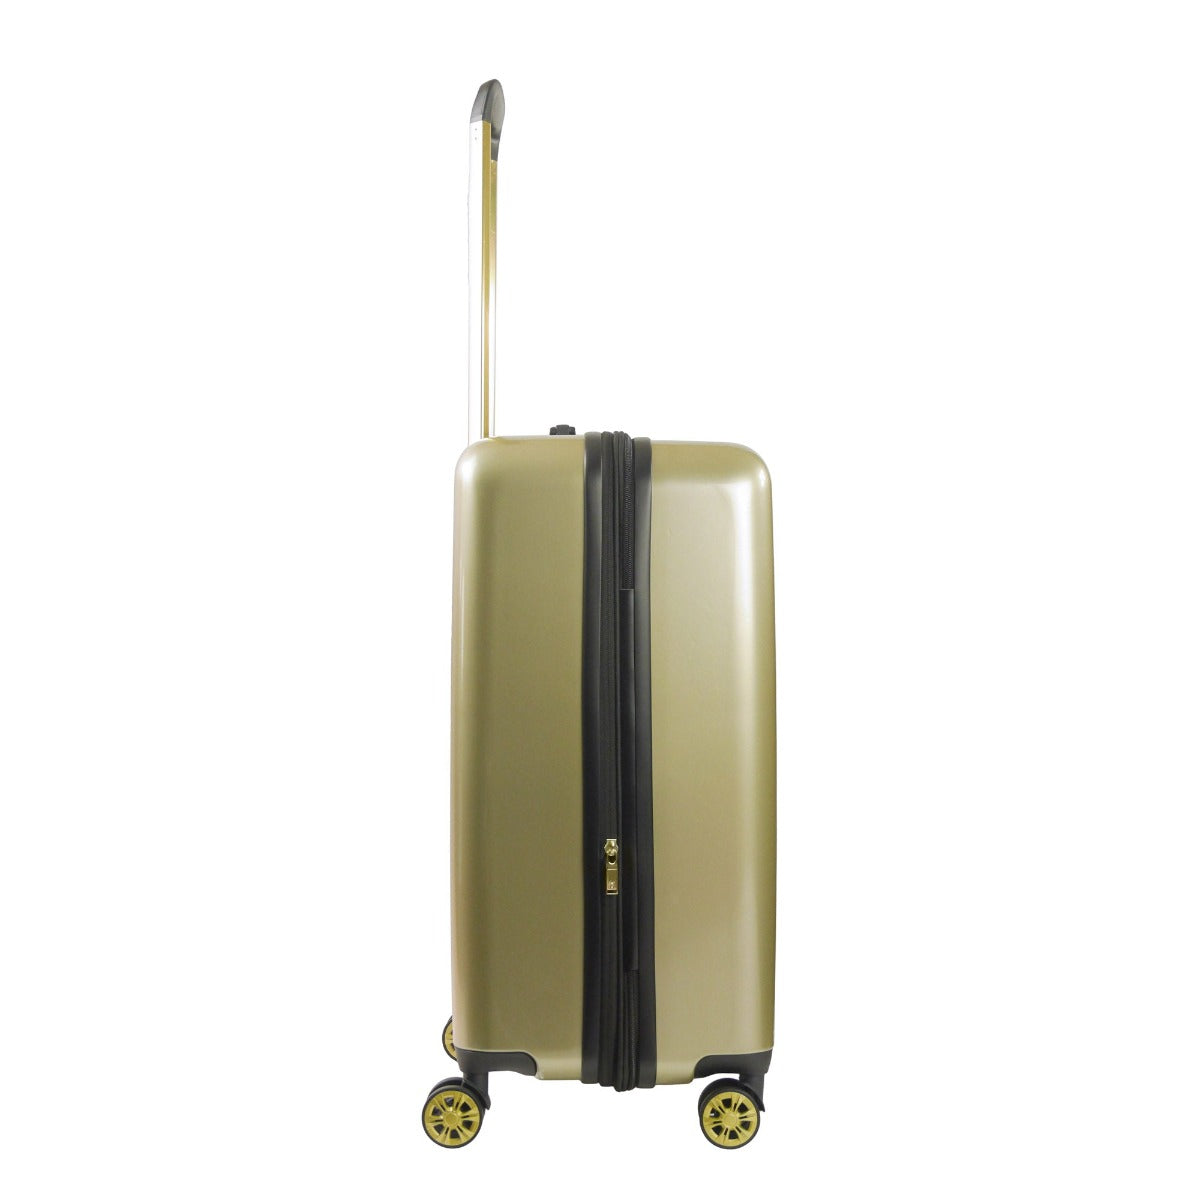 Ful Groove 27" hardside spinner suitcase checked gold luggage black details